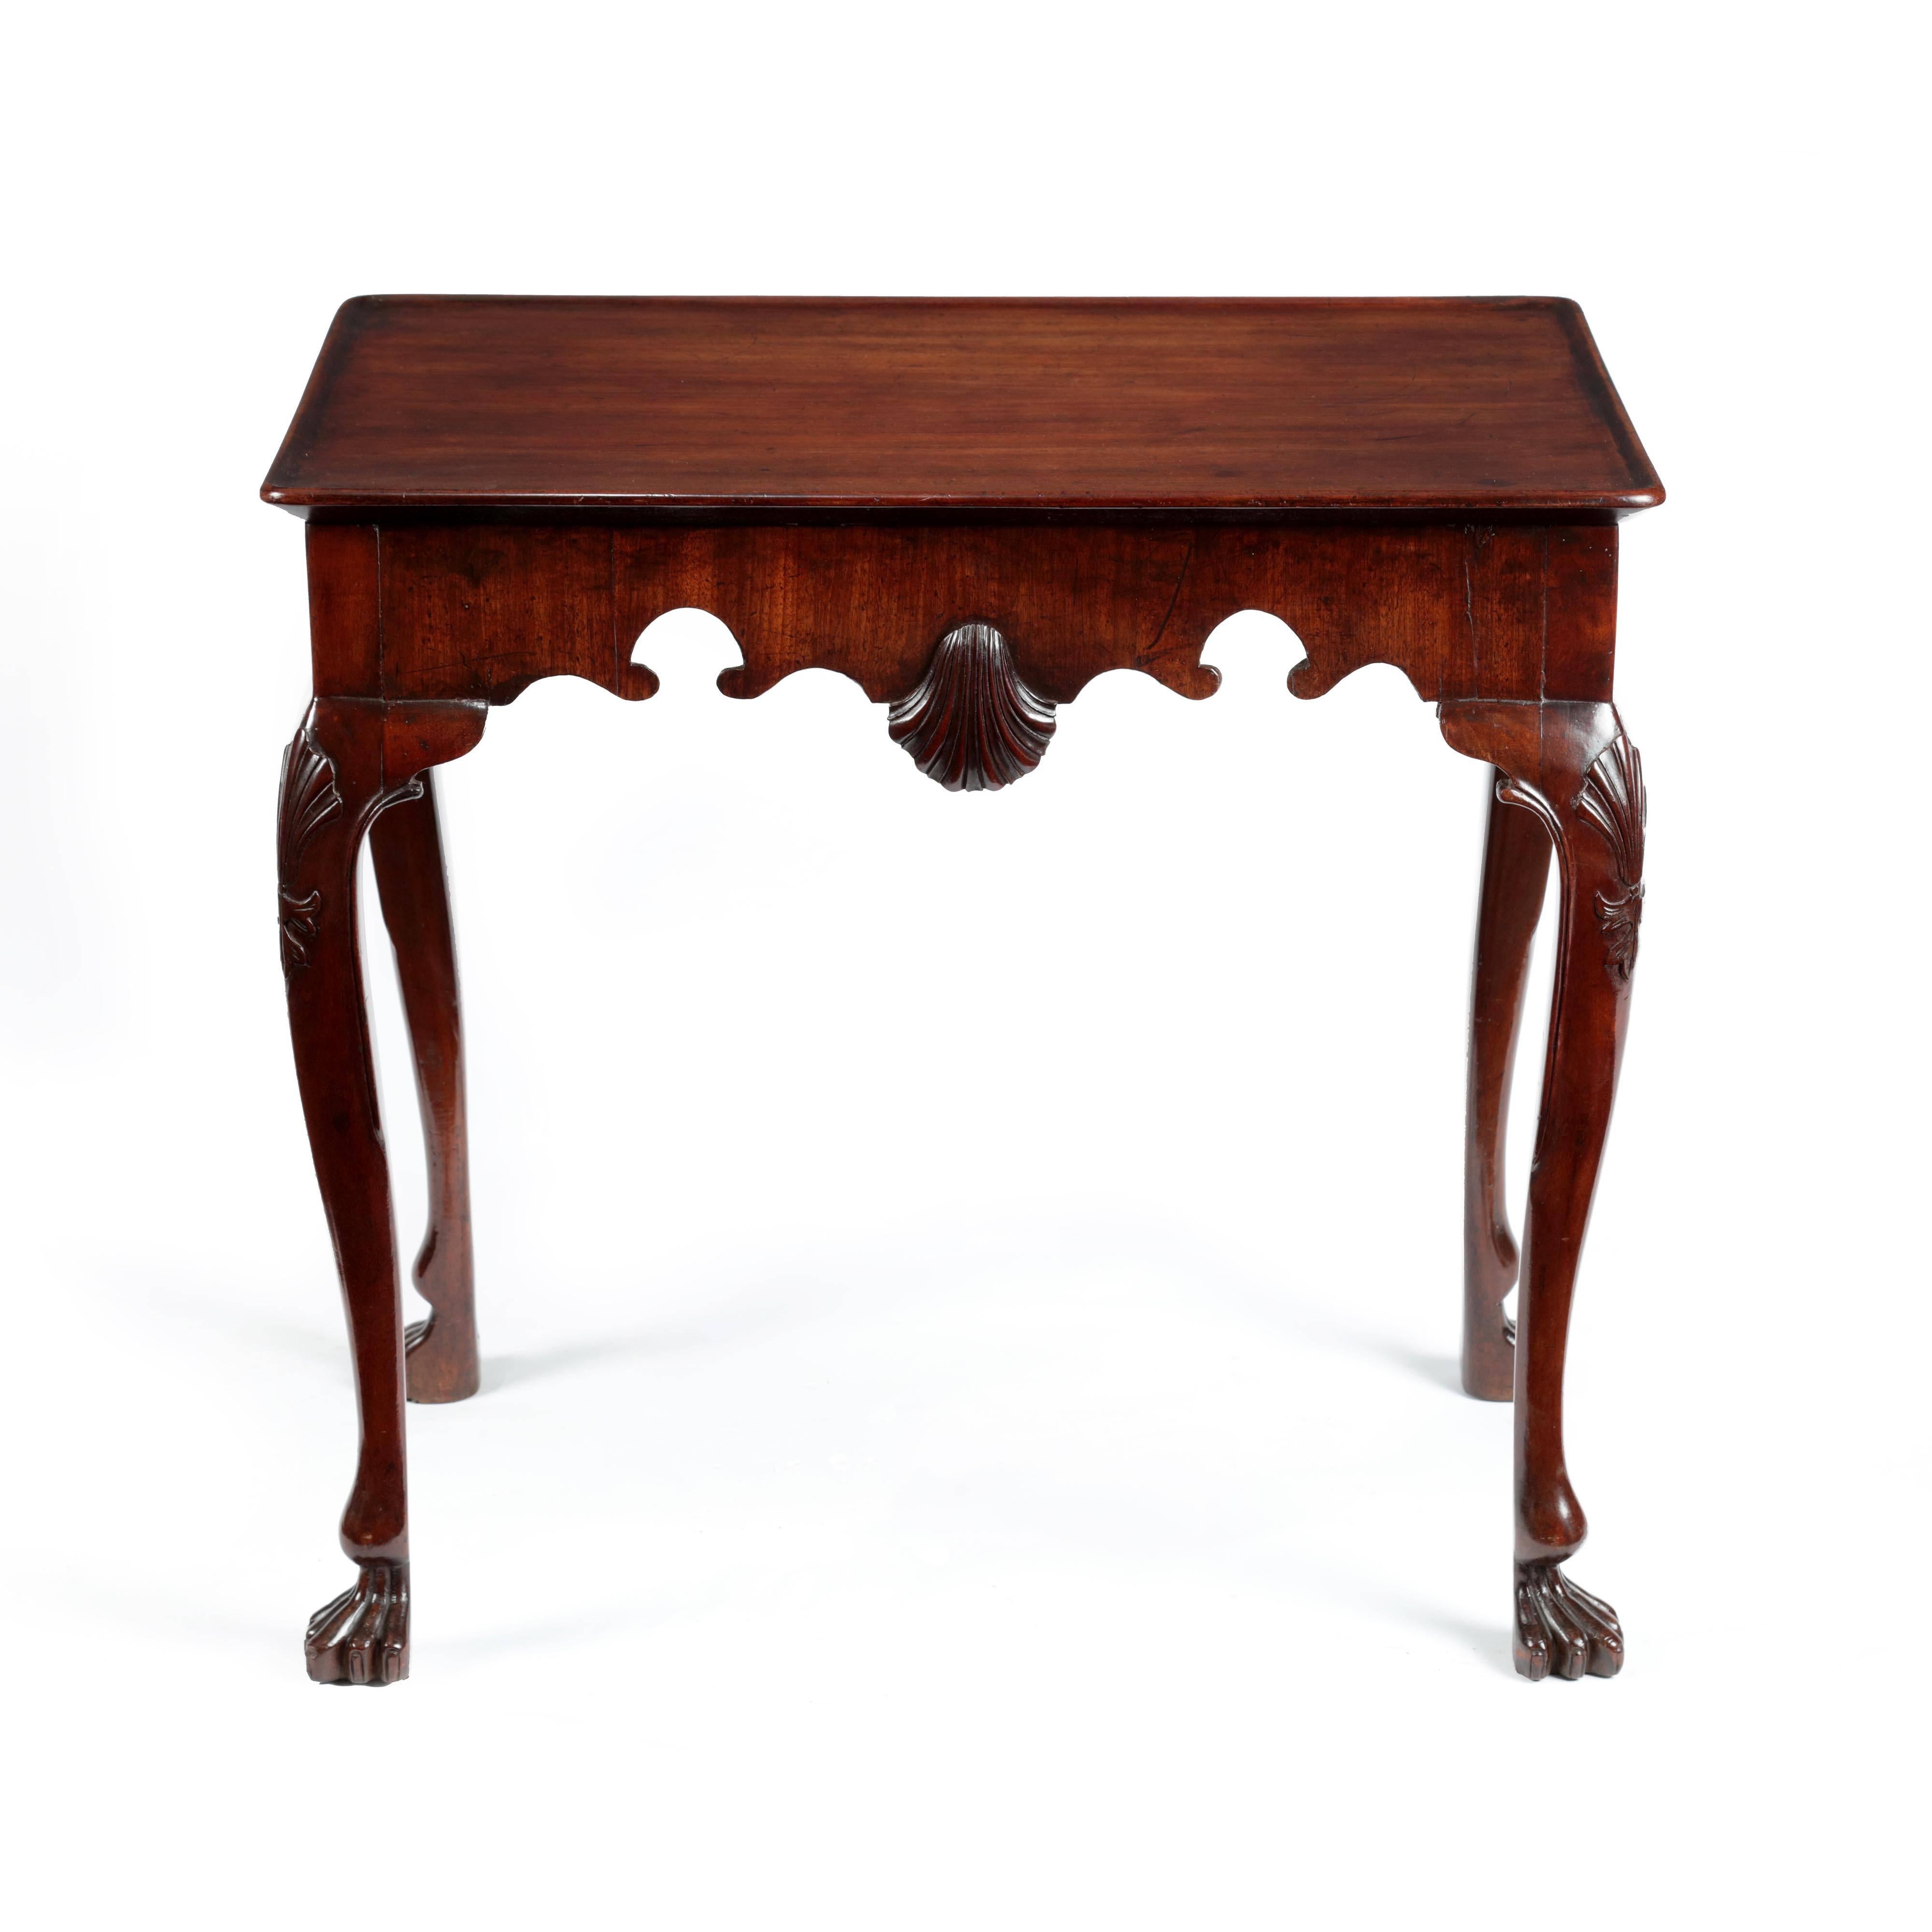 A Fine George II Irish Cuban mahogany tray top silver table of compact dimensions. The rectangular top with rounded corners and moulded lip to the edge, over a frieze with scroll cut apron and carved shell to the centre. The table is supported by